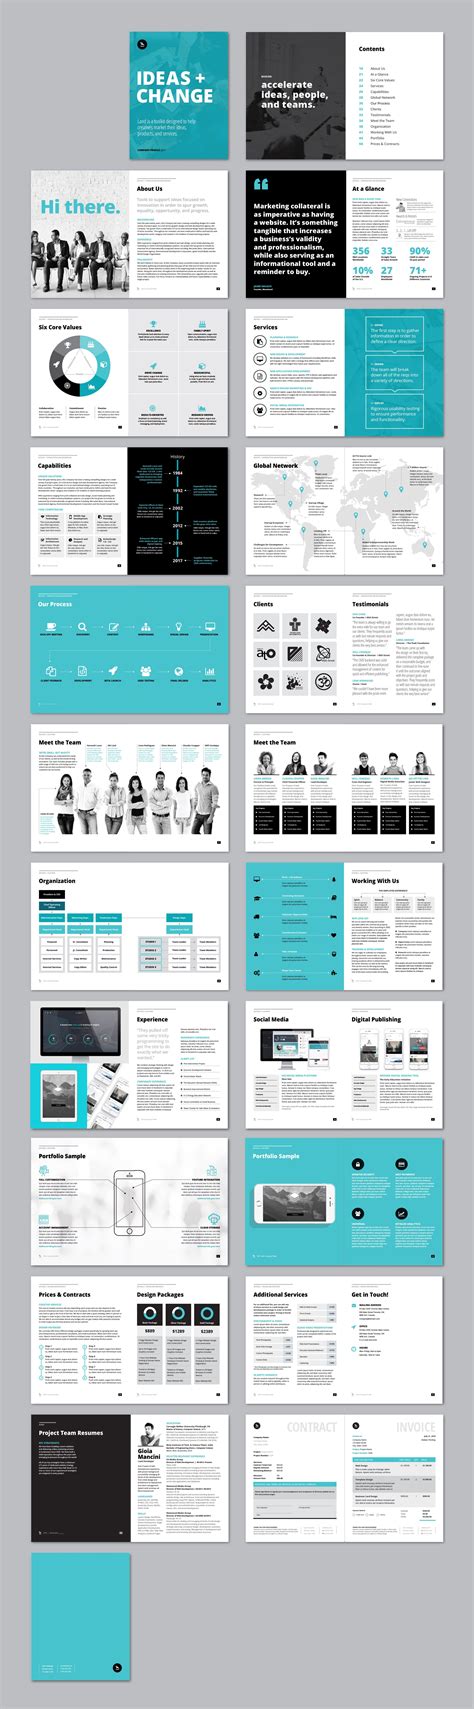 Company Profile And Overview Template Corporate Brochure Design